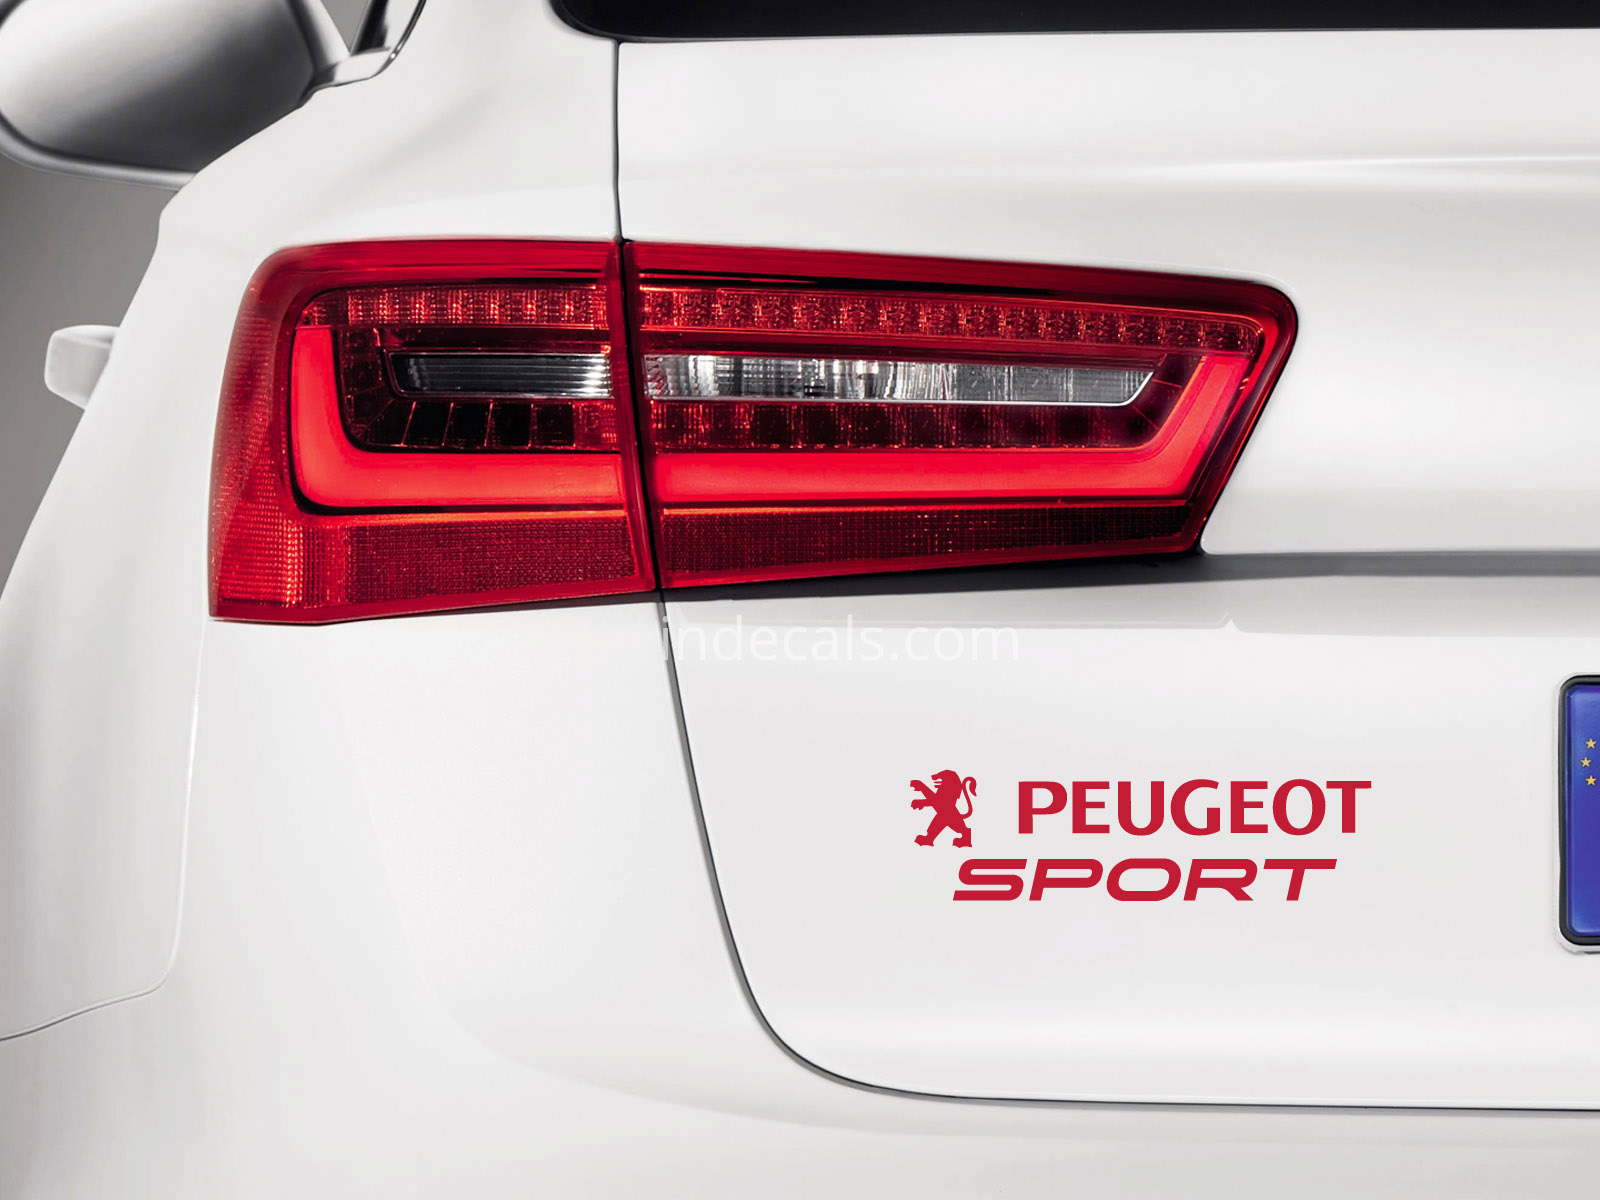 1 x Peugeot Sports Sticker for Trunk - Red